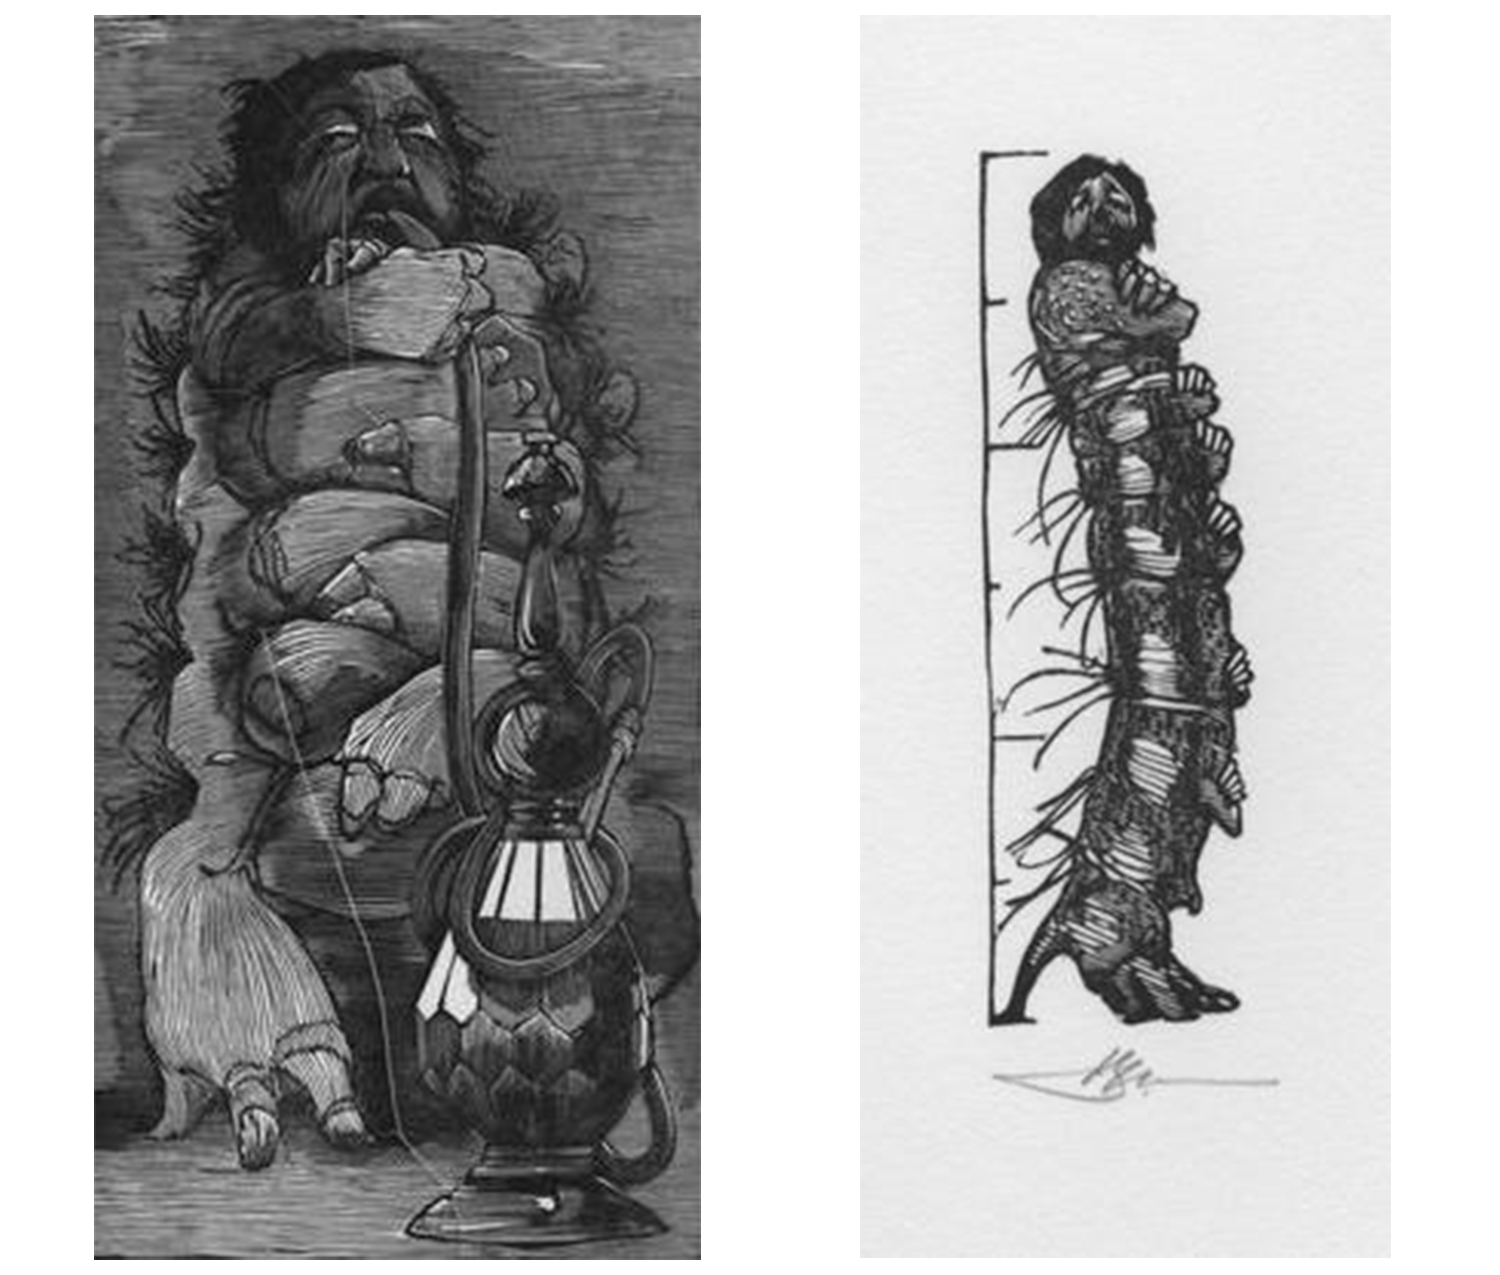 two sketches of a caterpillar standing up with human features